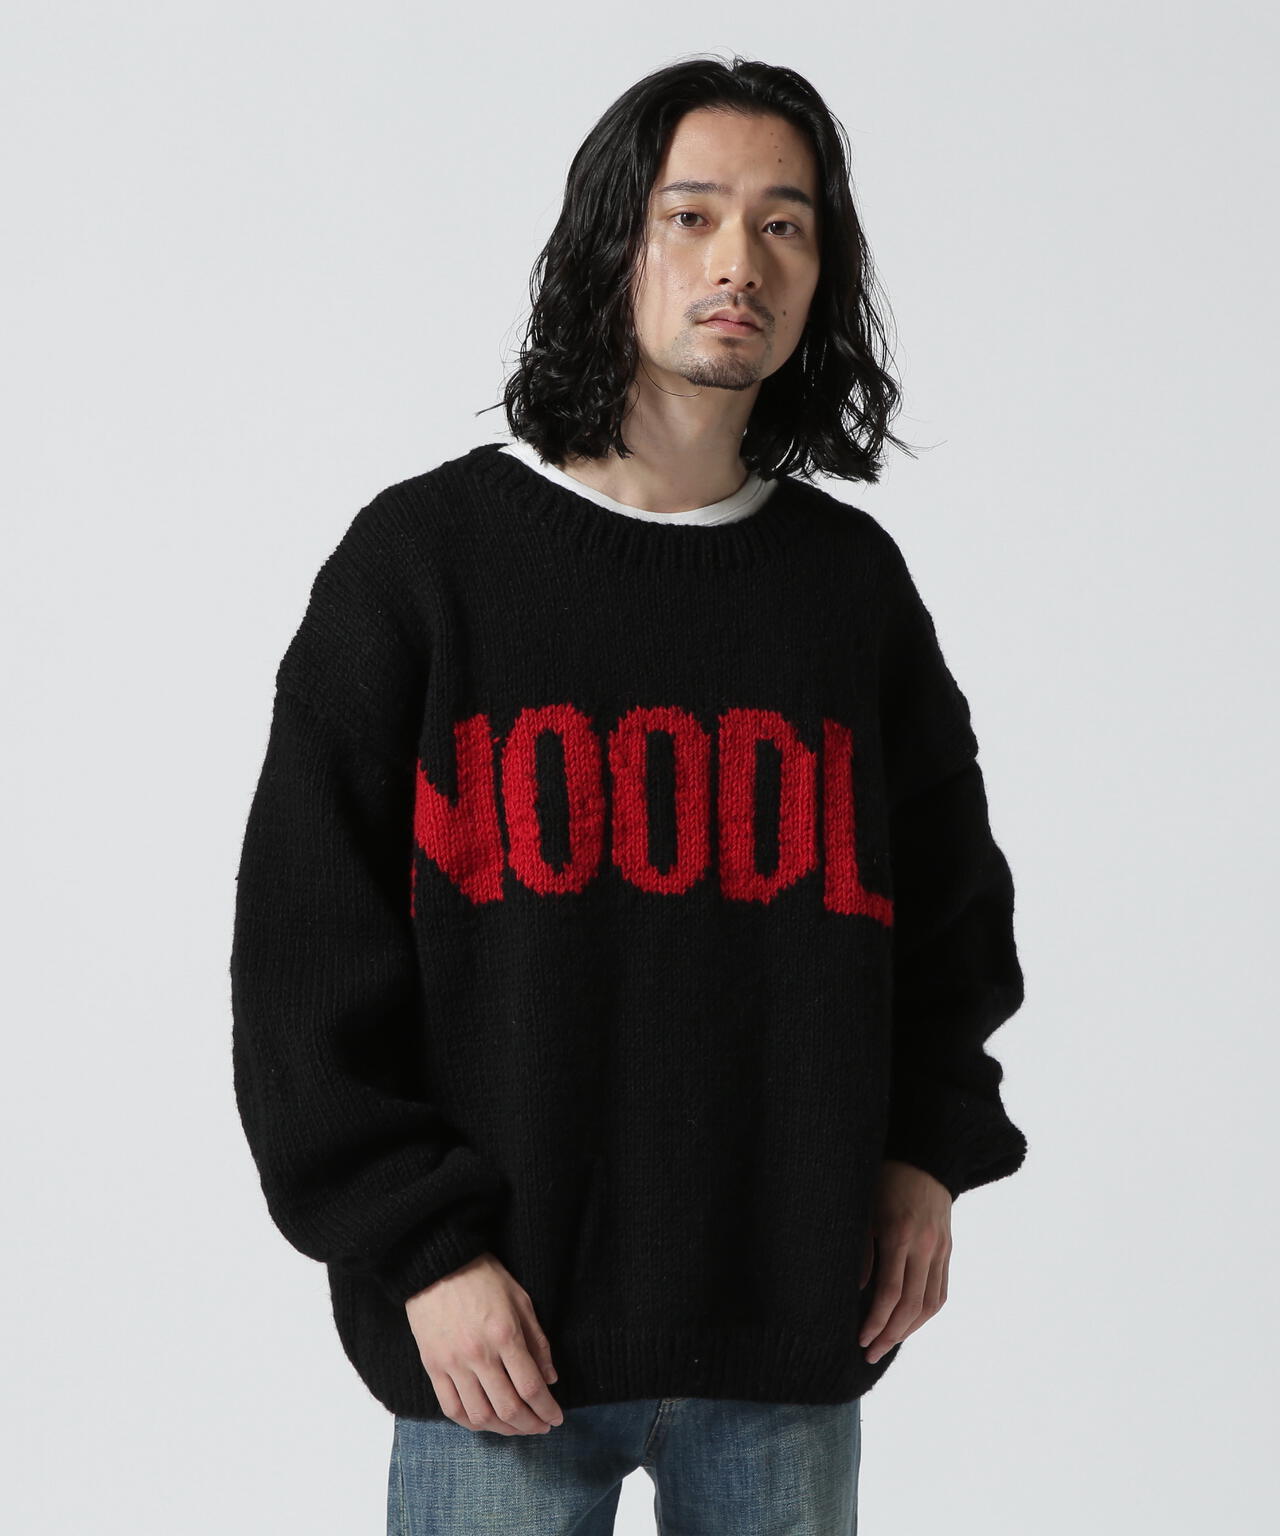 MacMahon Knitting Mills / Crew Neck Knit-NOODLE | B'2nd ( ビー ...